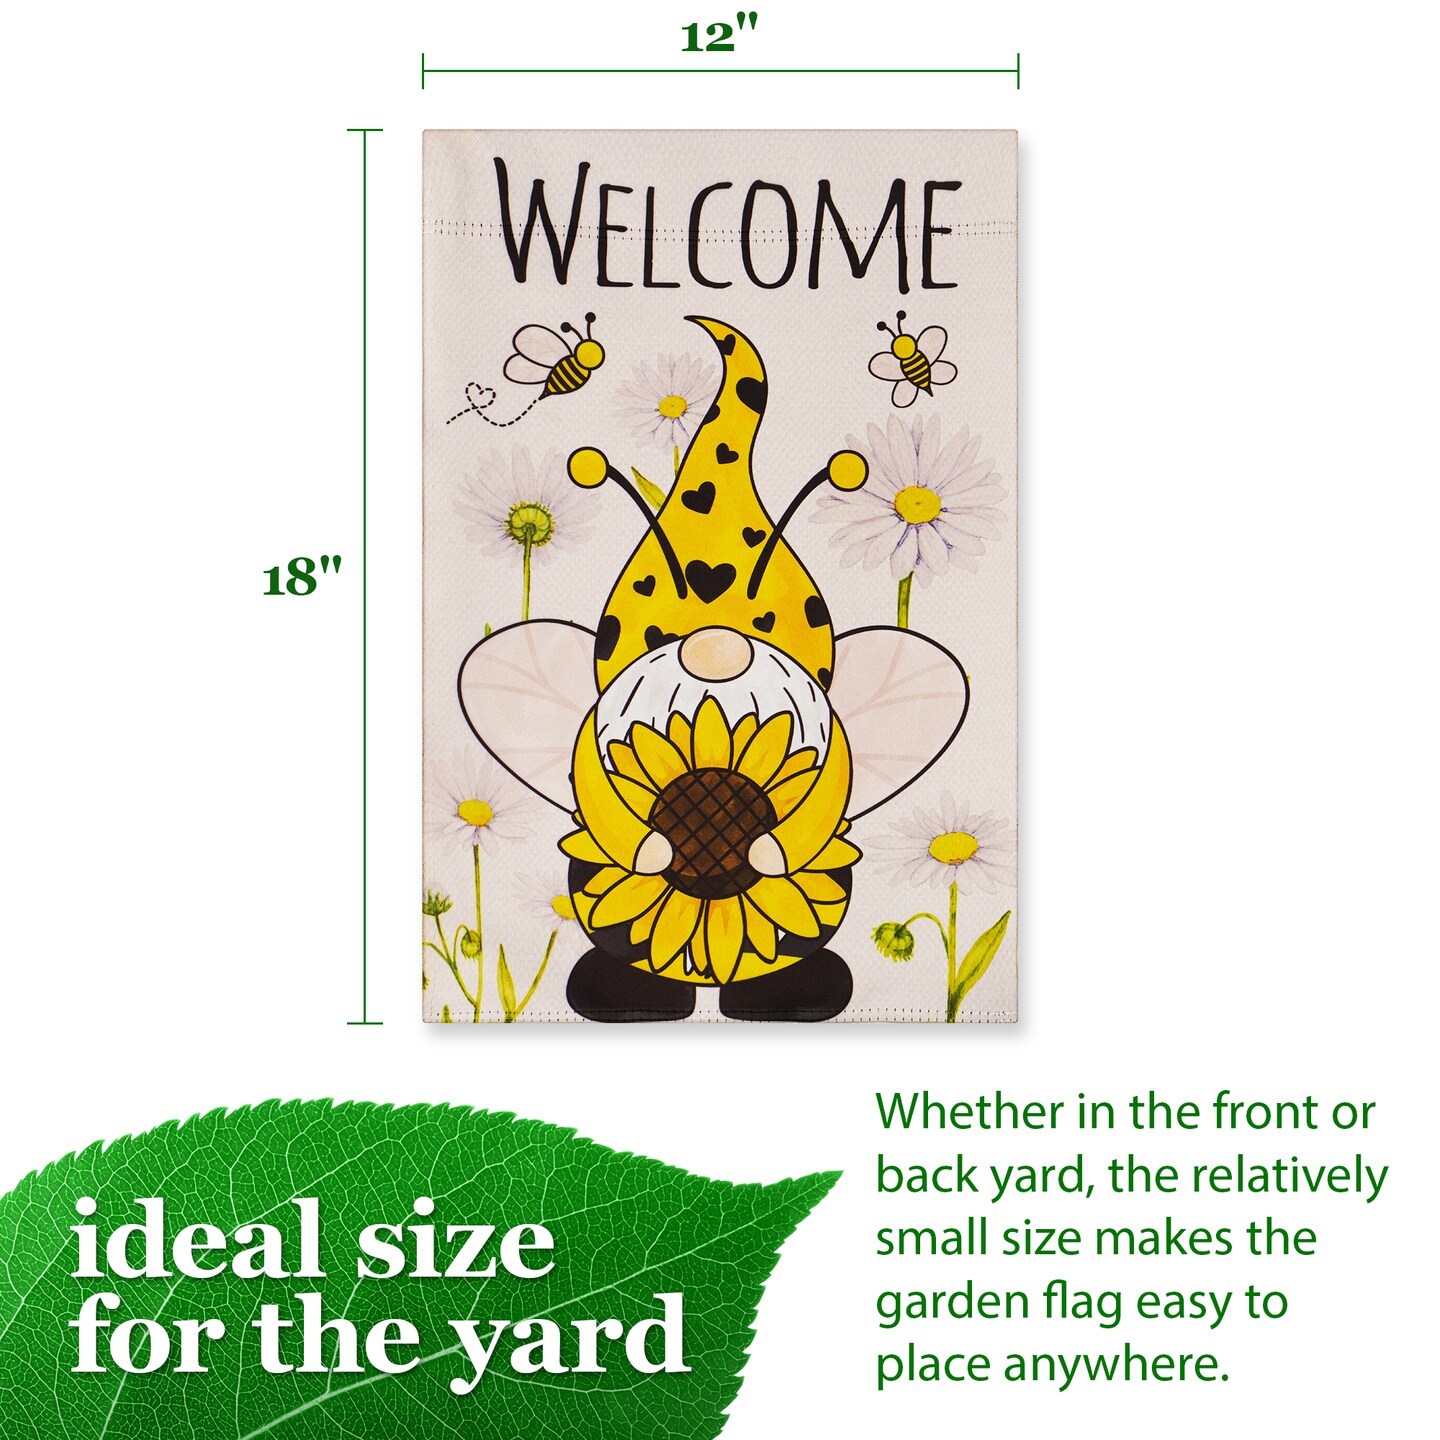 G128 Garden Flag Welcome Bee Gnome with Sunflower 12&#x22;x18&#x22; Blockout Fabric